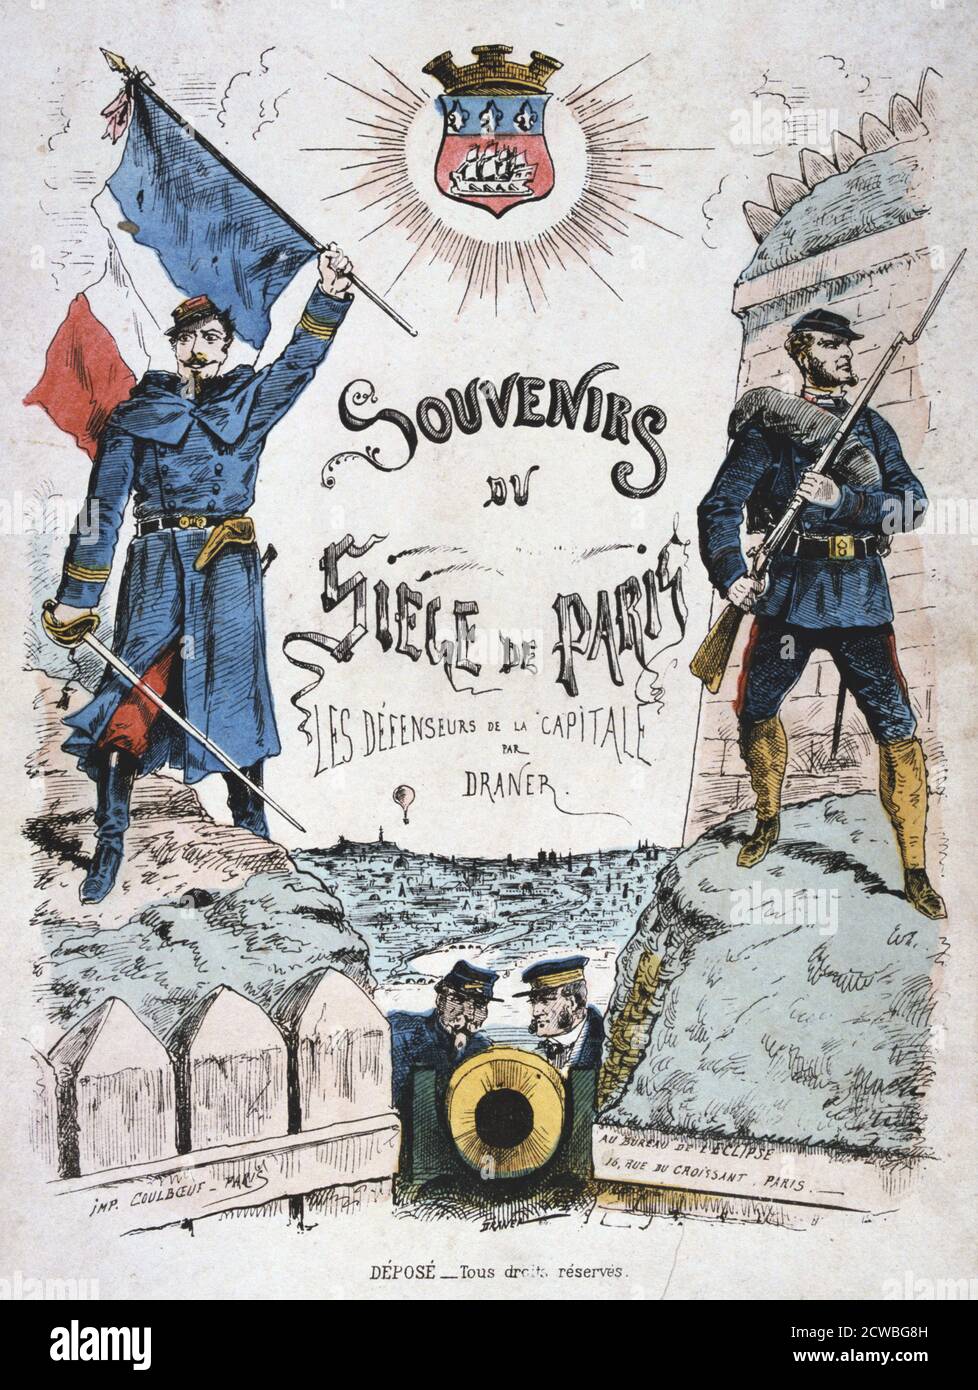 Cover for Souvenirs du Siege de Paris, 1870-1871. After the disastrous defeat of the French at Sedan and the capture of Napoleon III, the Prussians surrounded Paris on 9 September 1870. The French commander, General Trochu, opted to rely on a static defence based on the city's fortifications rather than trying to break through the Prussian encirclement. The Prussians, meanwhile, had no intention of invading the city, relying on a blockade to compel its capitulation. The city held out despite famine and great hardship until a bombardment with heavy siege guns led to its surrender on 28 January Stock Photo